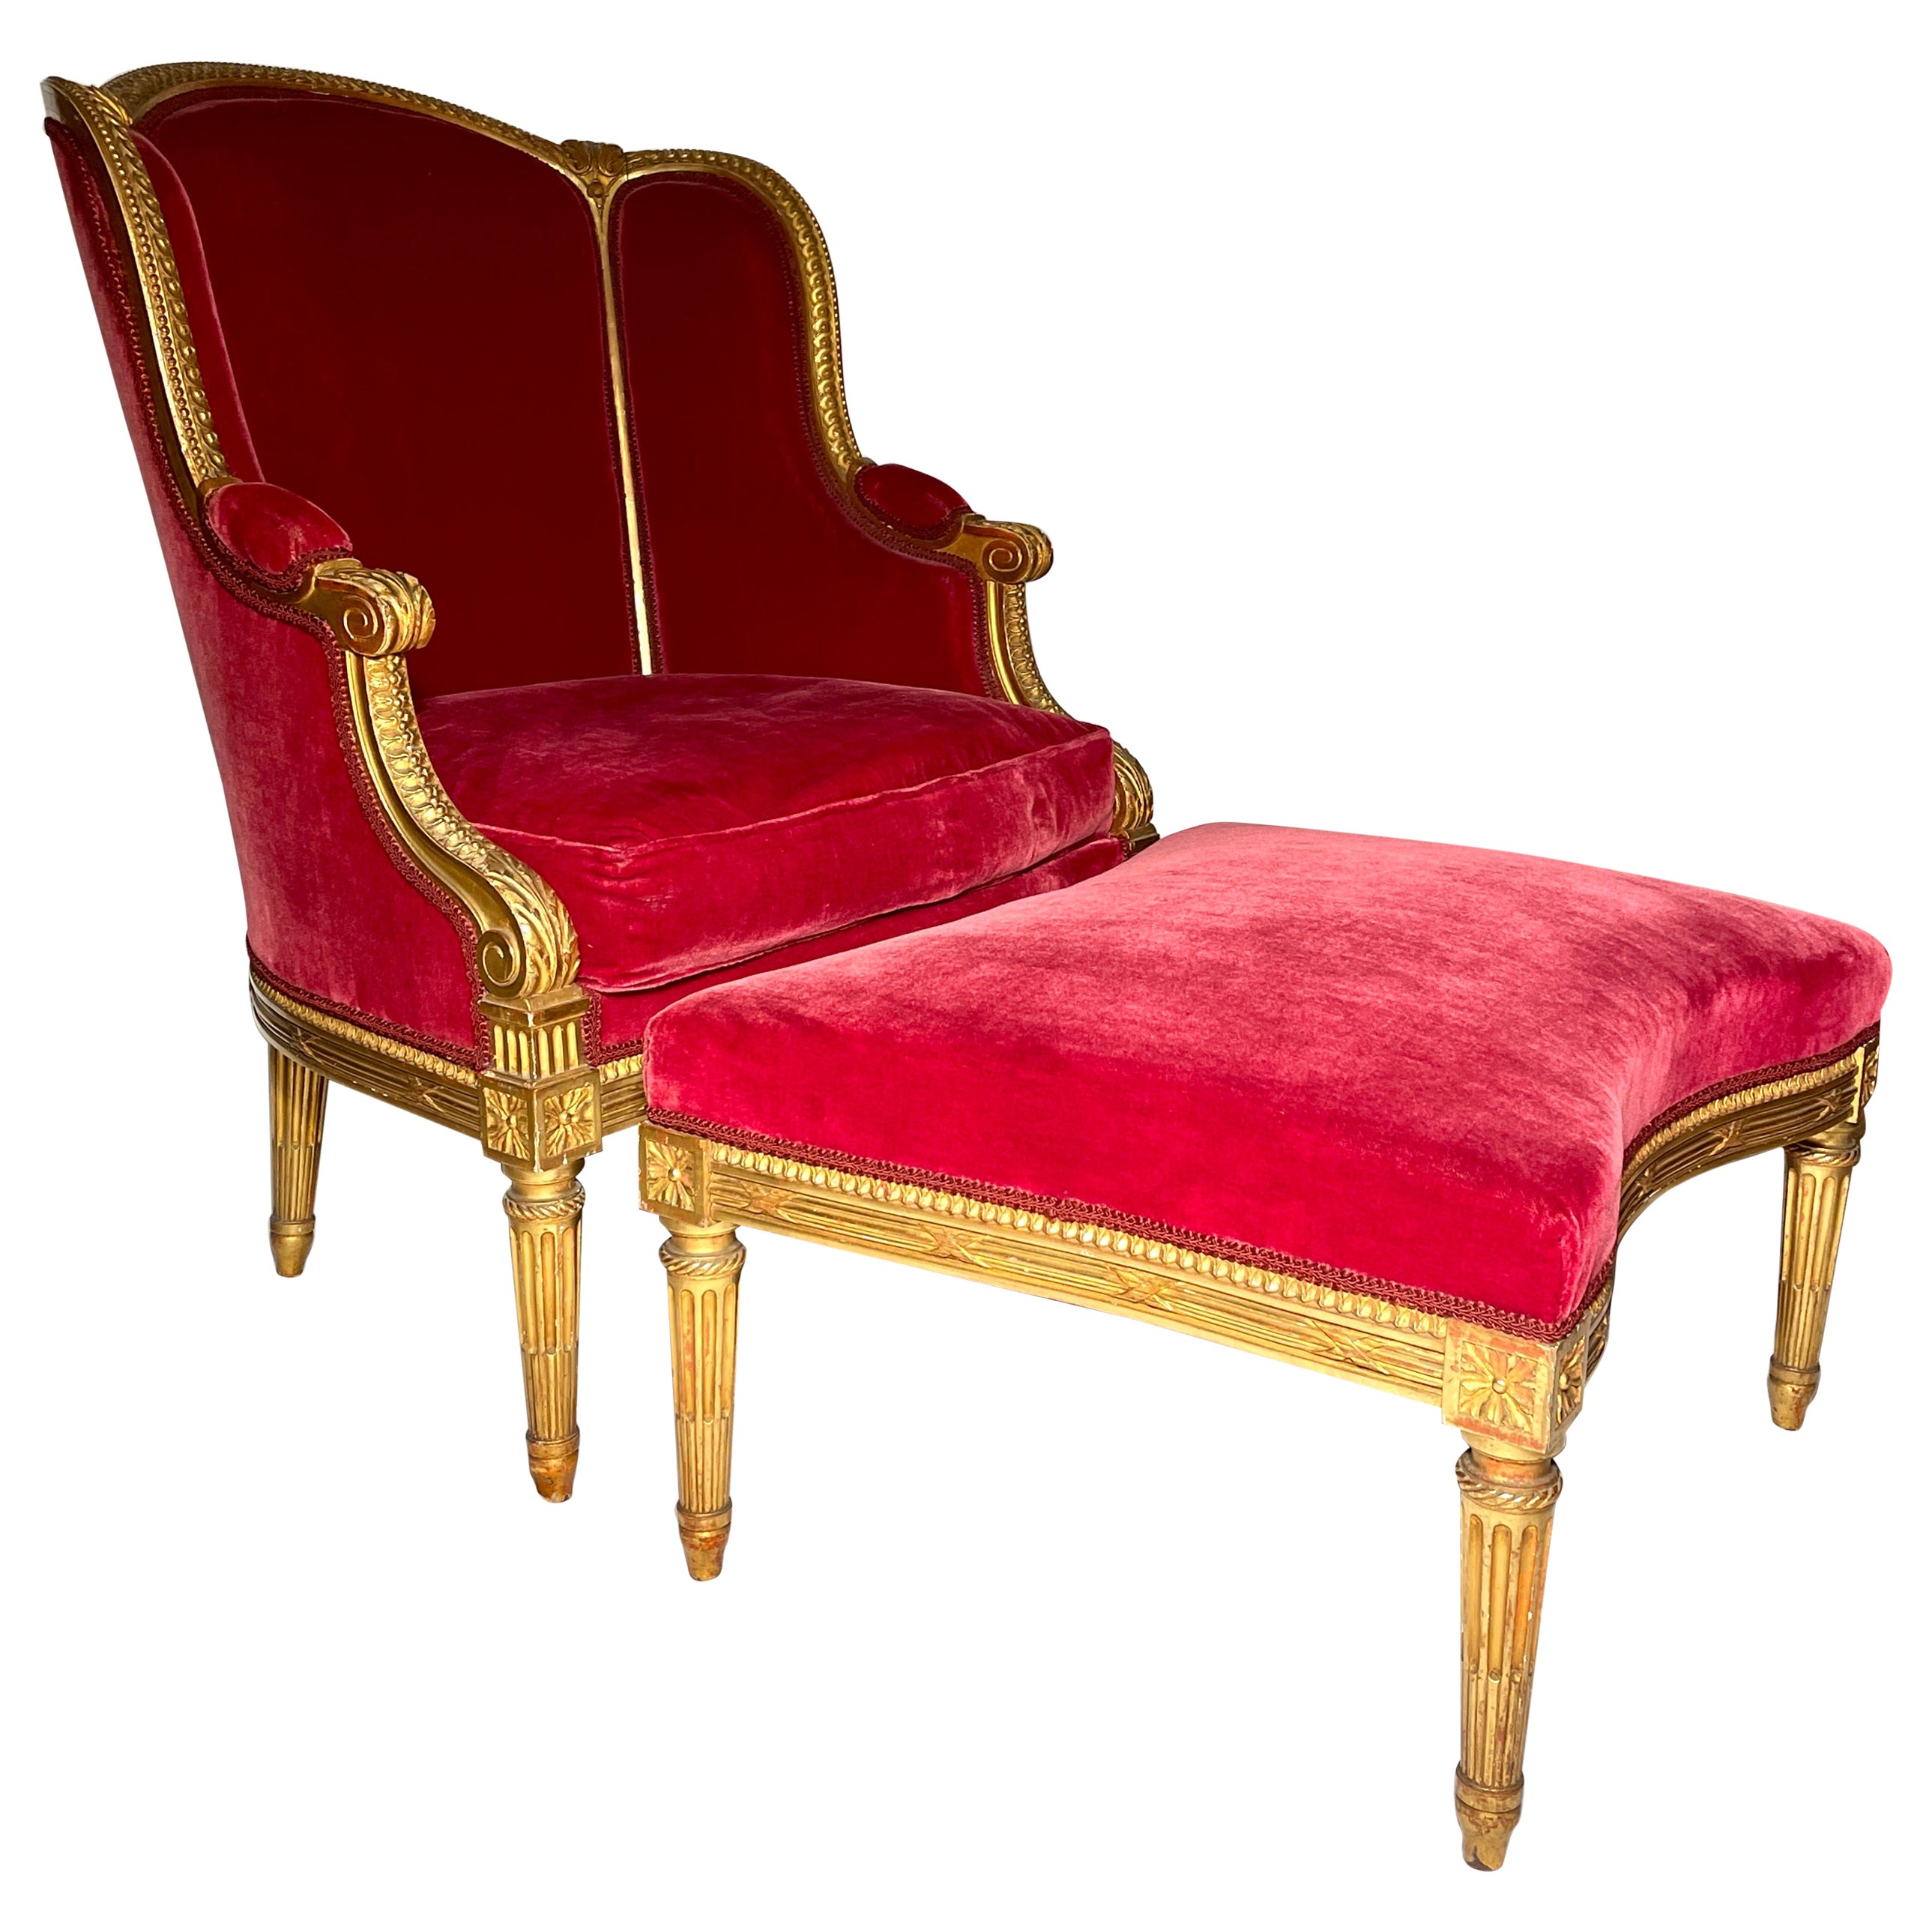 Antique French Louis XVI Chaise Lounge and Ottoman, circa 1890